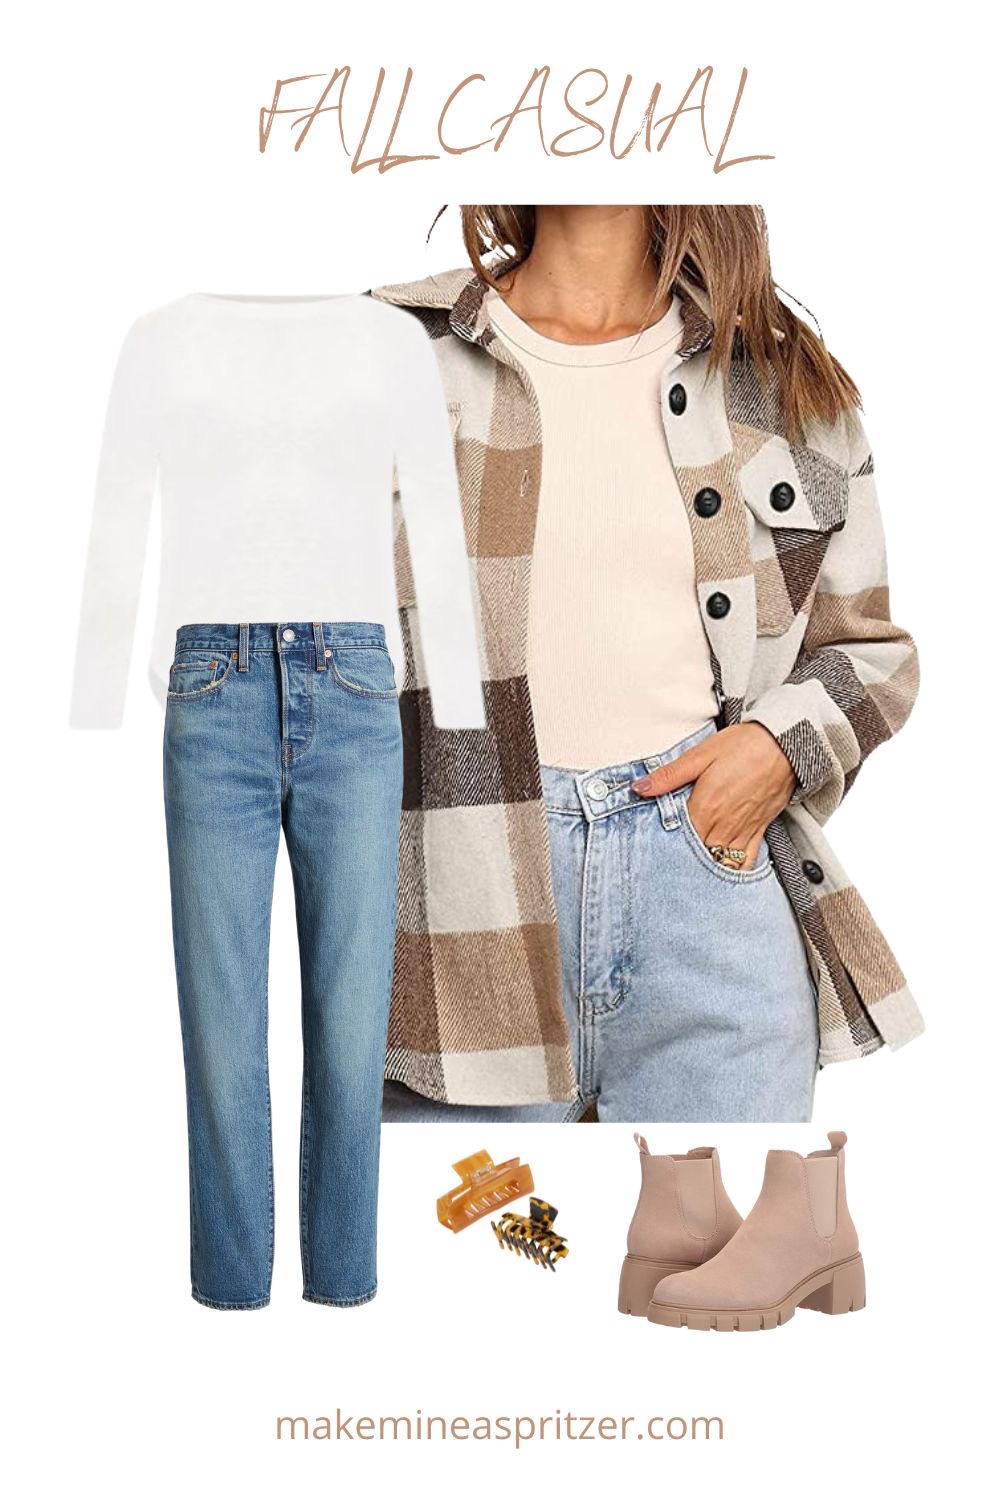 Fall Outfit Collage.